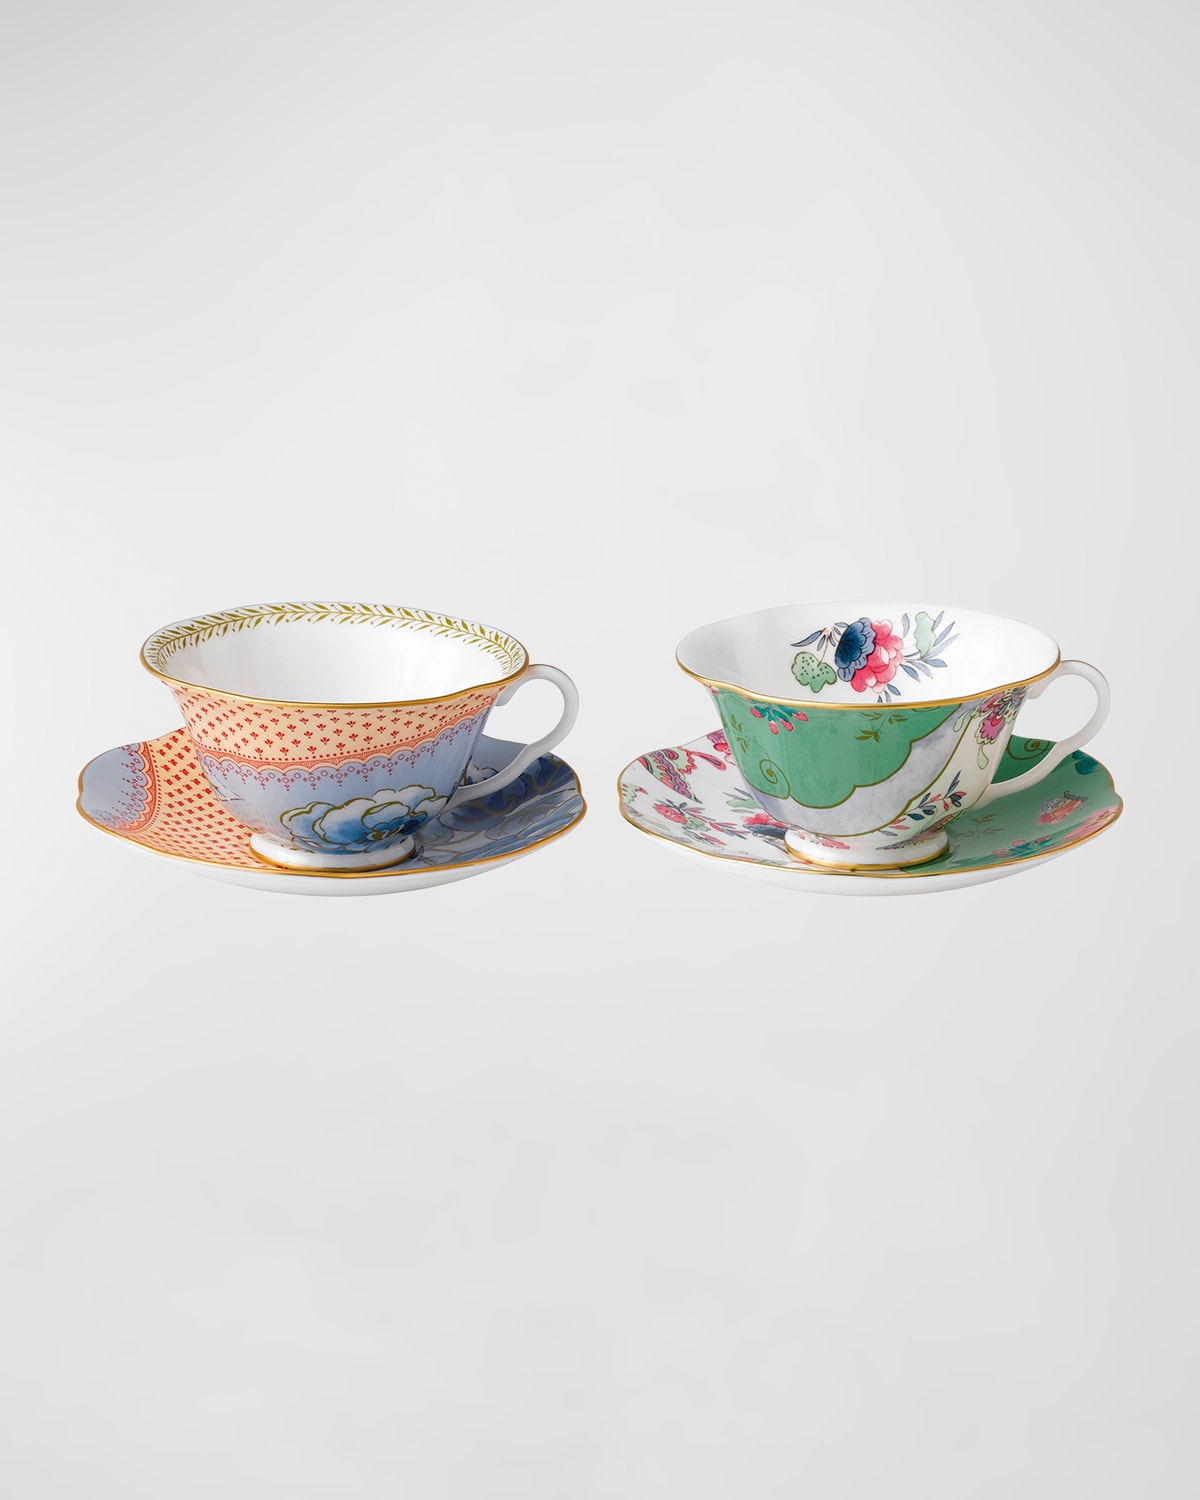 Butterfly Bloom Teacup & Saucer, Set of 2